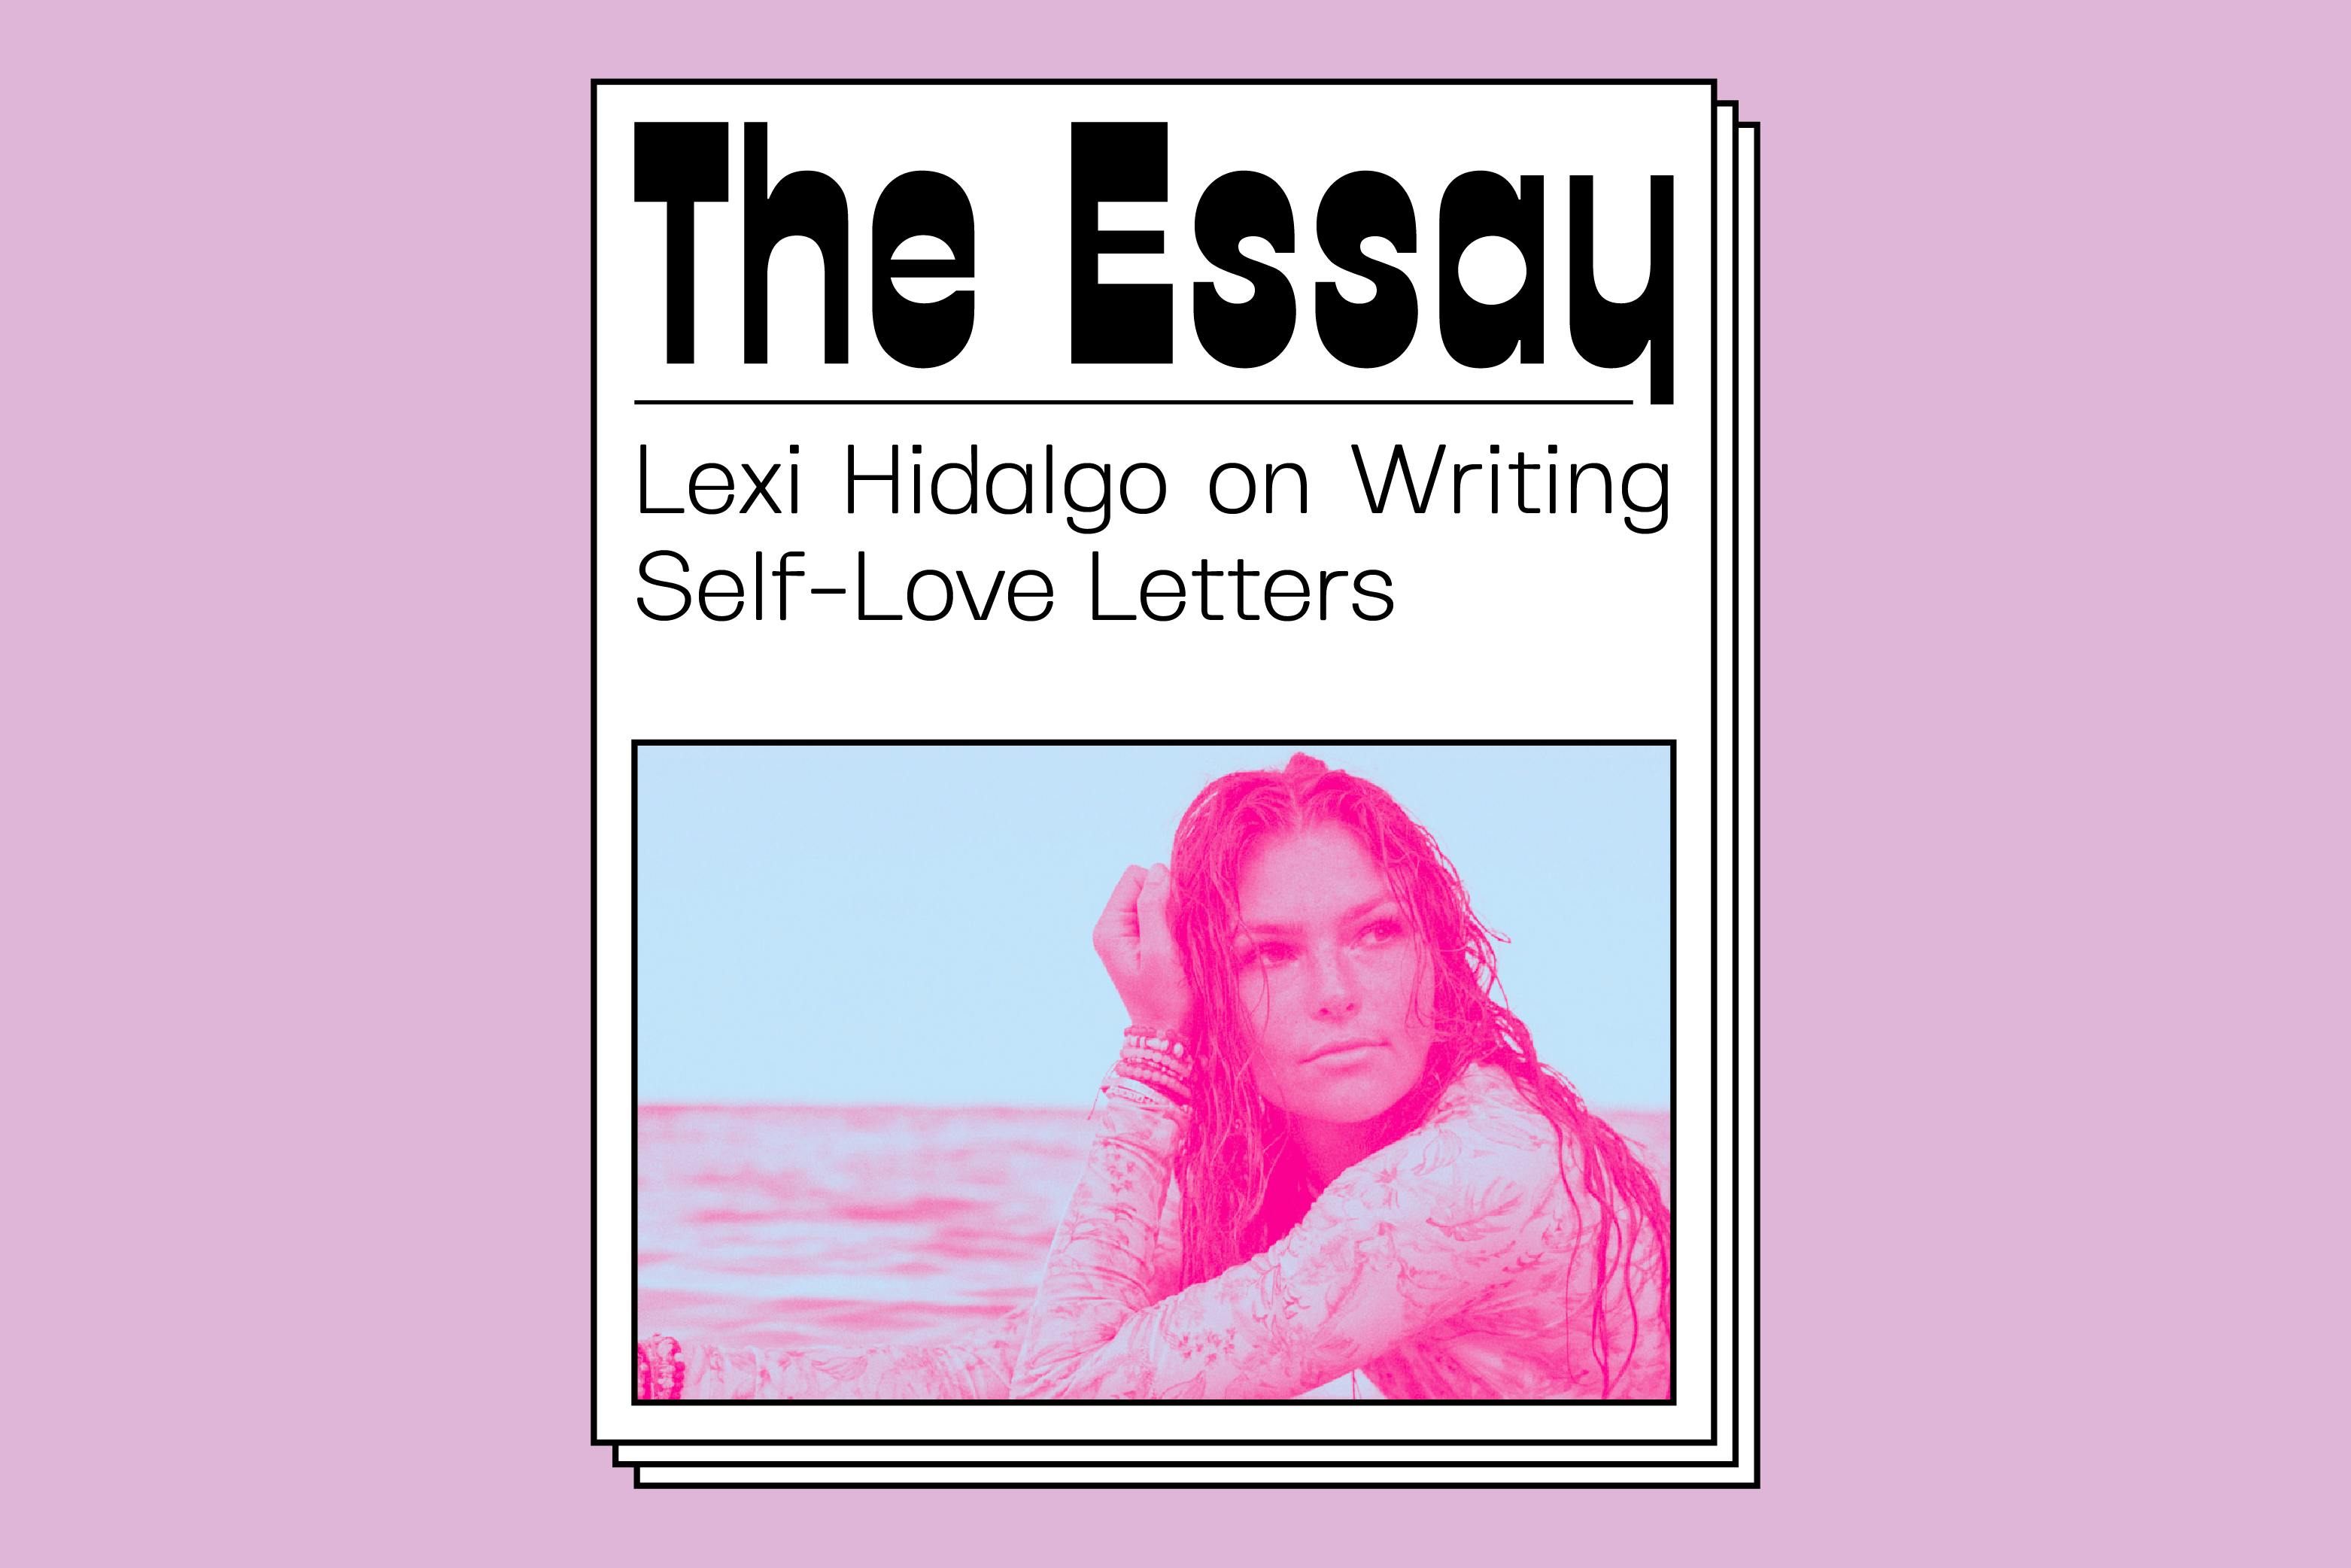 The Essay: Lexi Hidalgo on Writing Self-Love Letters